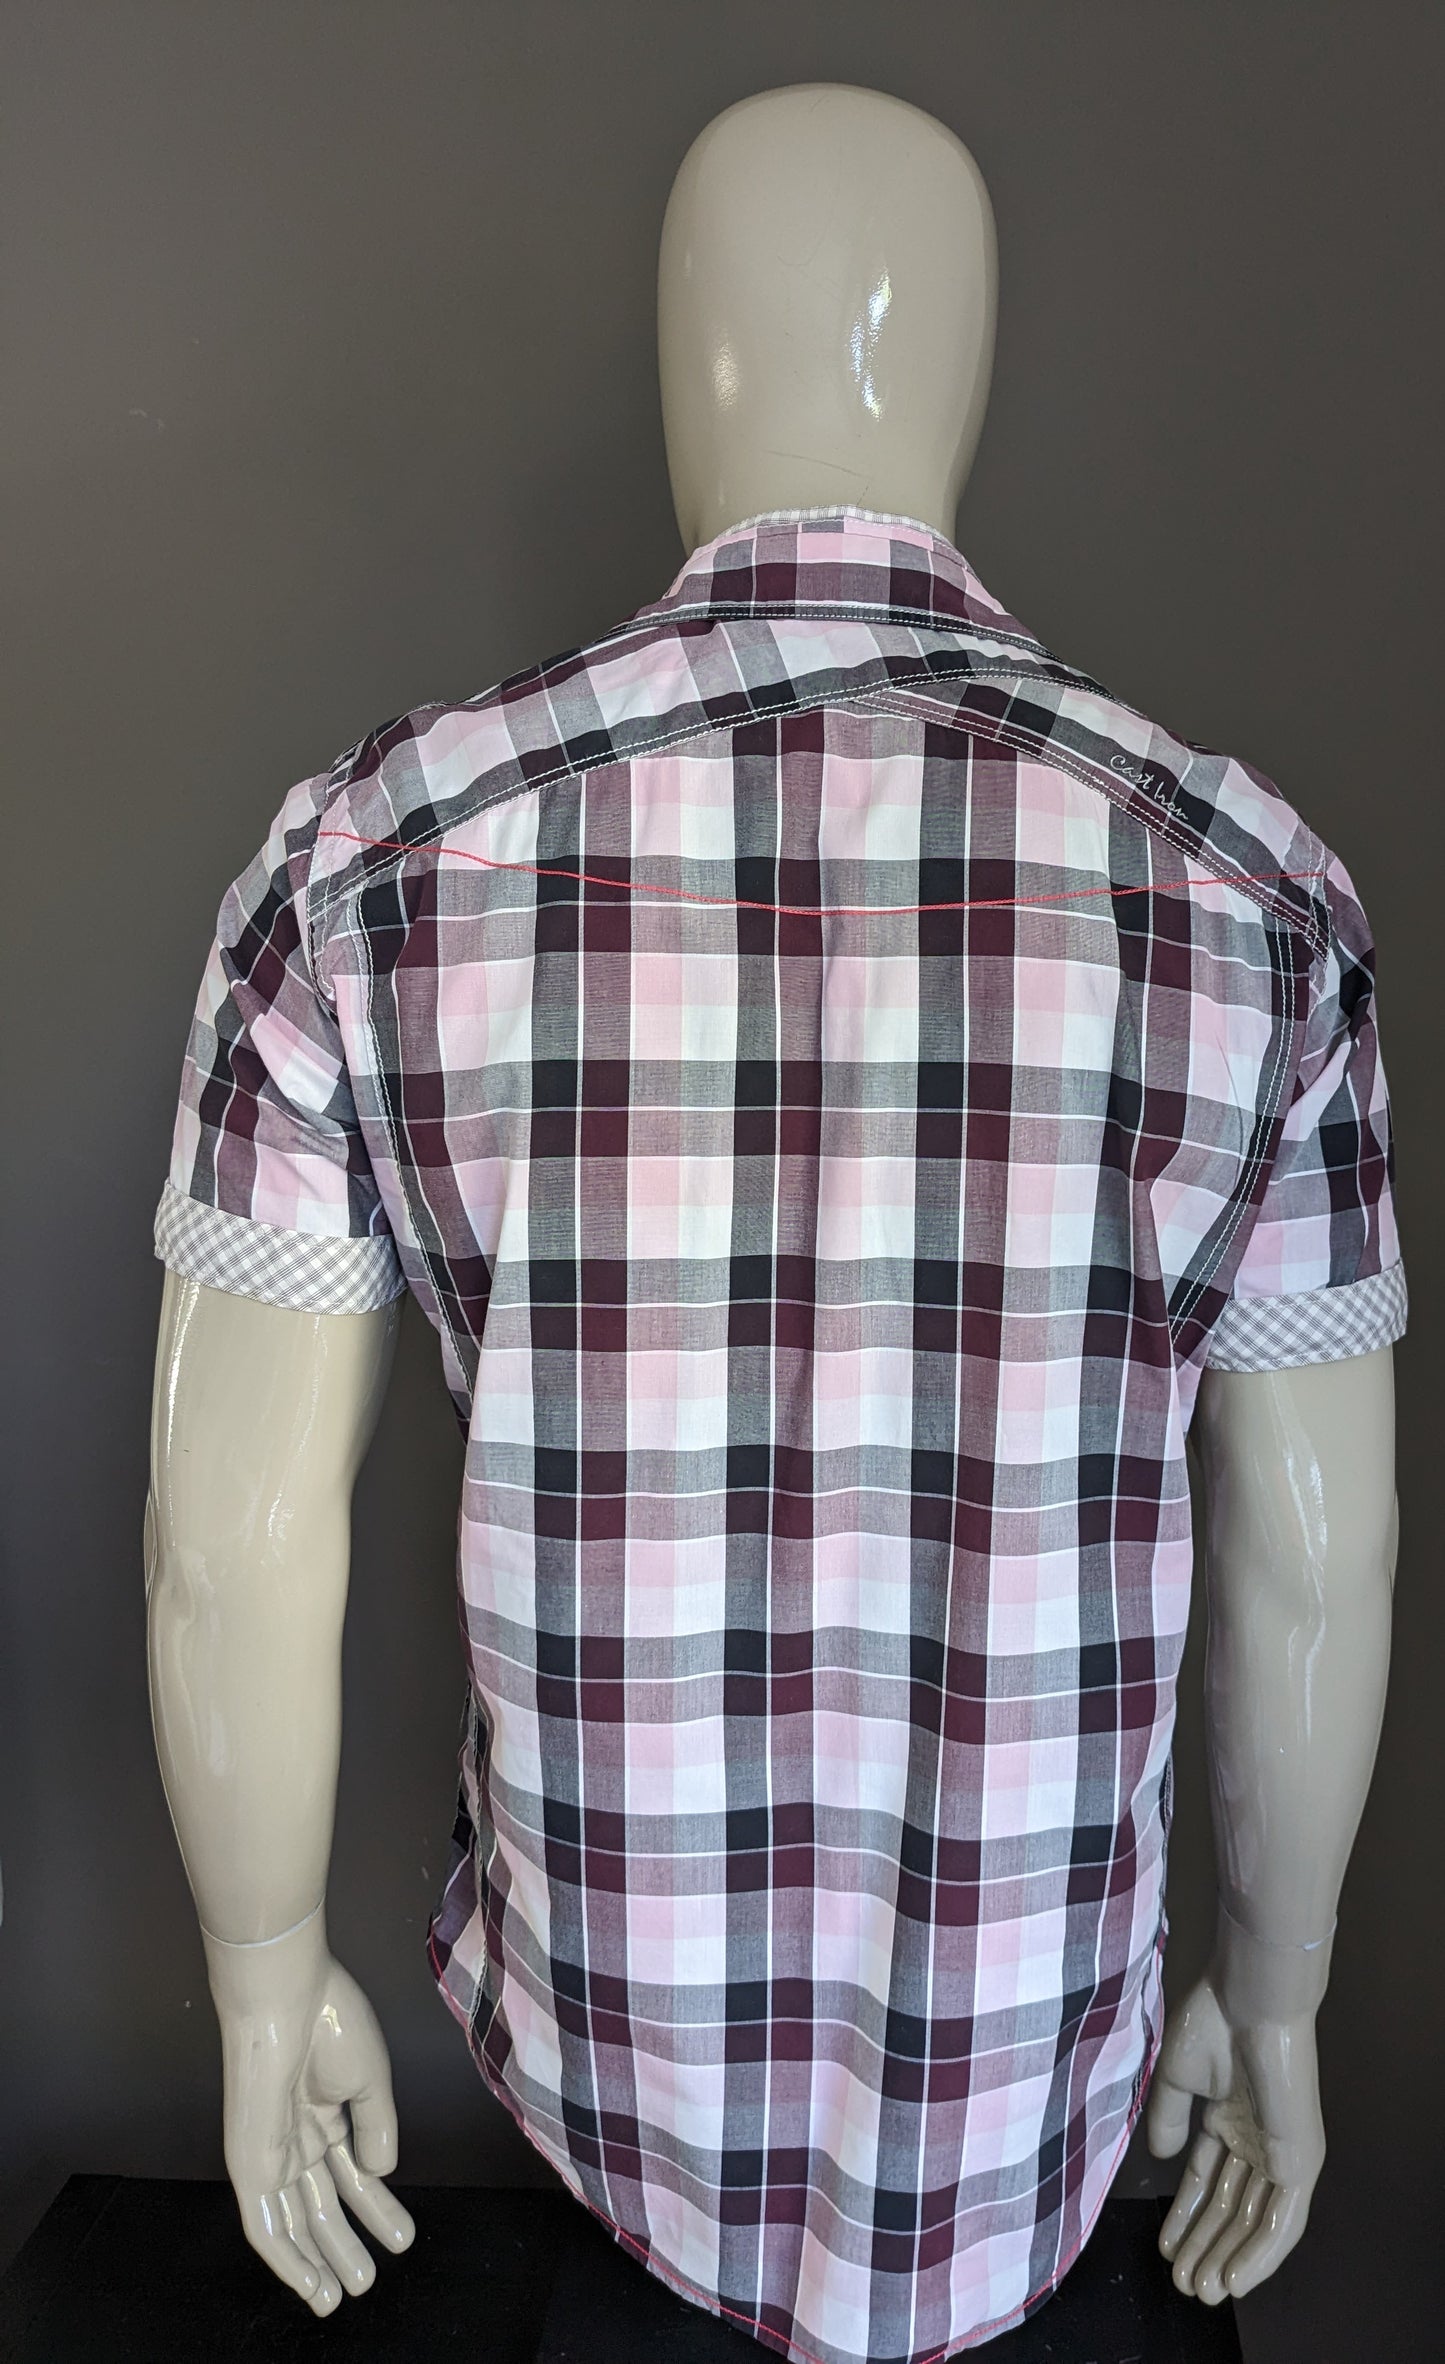 Cast Iron Shirt short sleeve and double collar. Purple pink black and white checkered. Size XL.